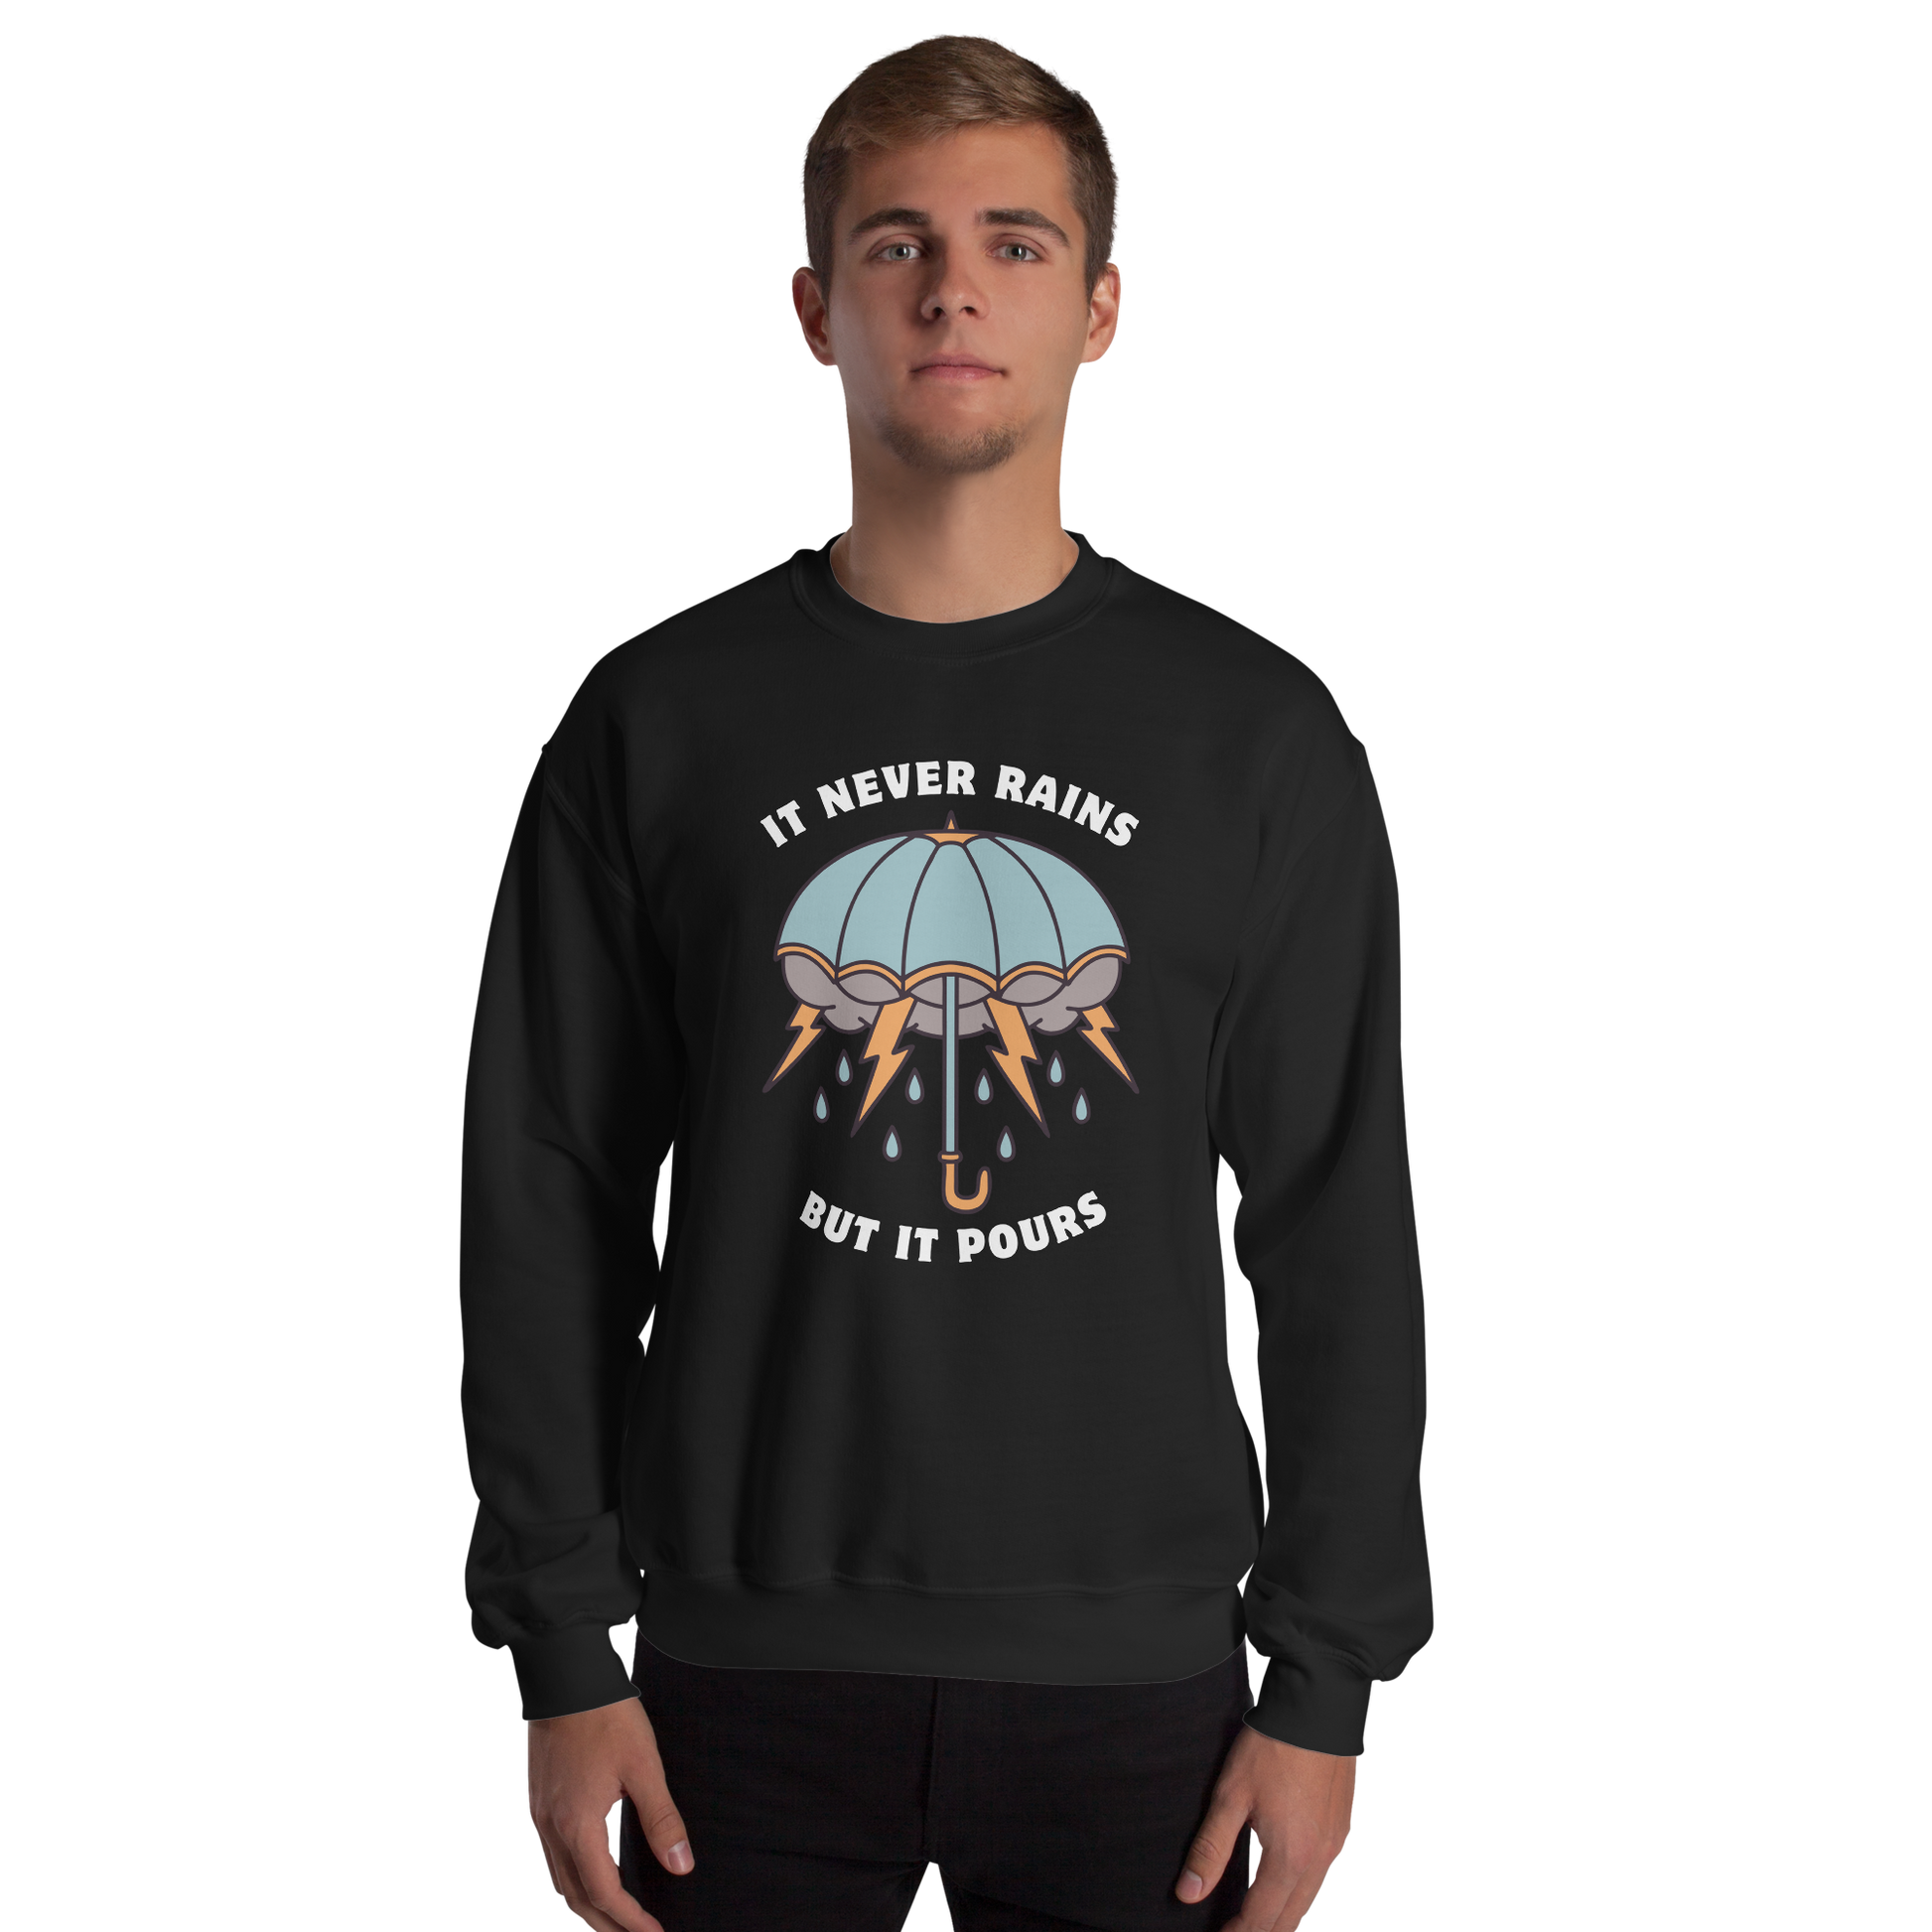 Man wearing a Black Umbrella Sweatshirt featuring a unique It Never Rains But It Pours graphic on the chest - Cool Tattoo-Inspired Graphic Umbrella Sweatshirts - Boozy Fox